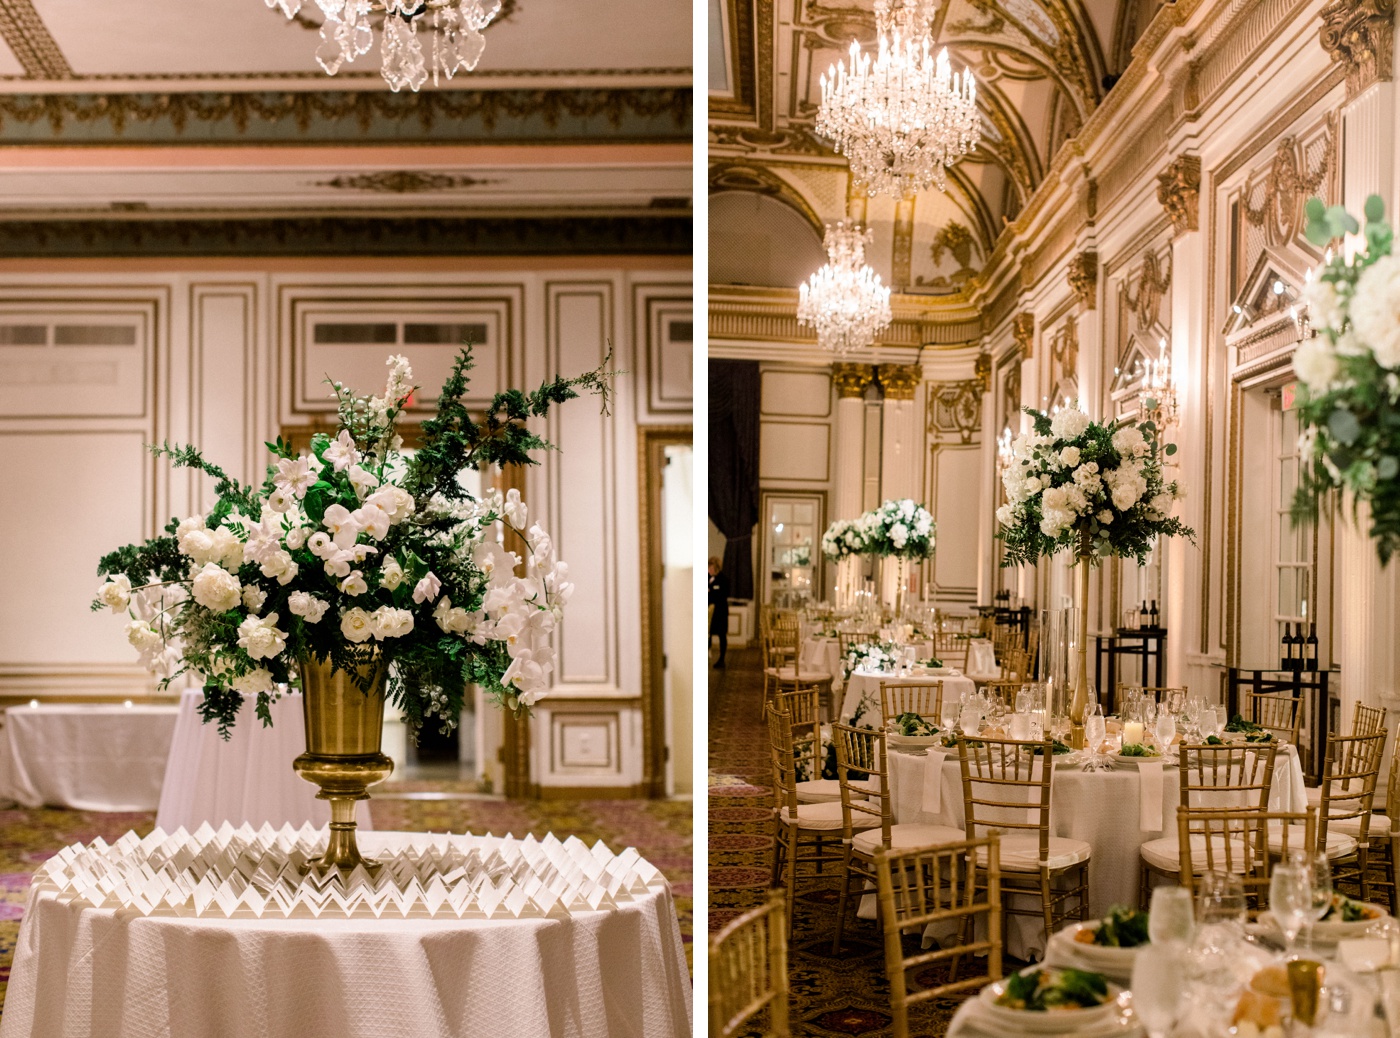 Flower arrangements for a wedding reception with white orchids, anemones, roses, and peonies by Fleur Events